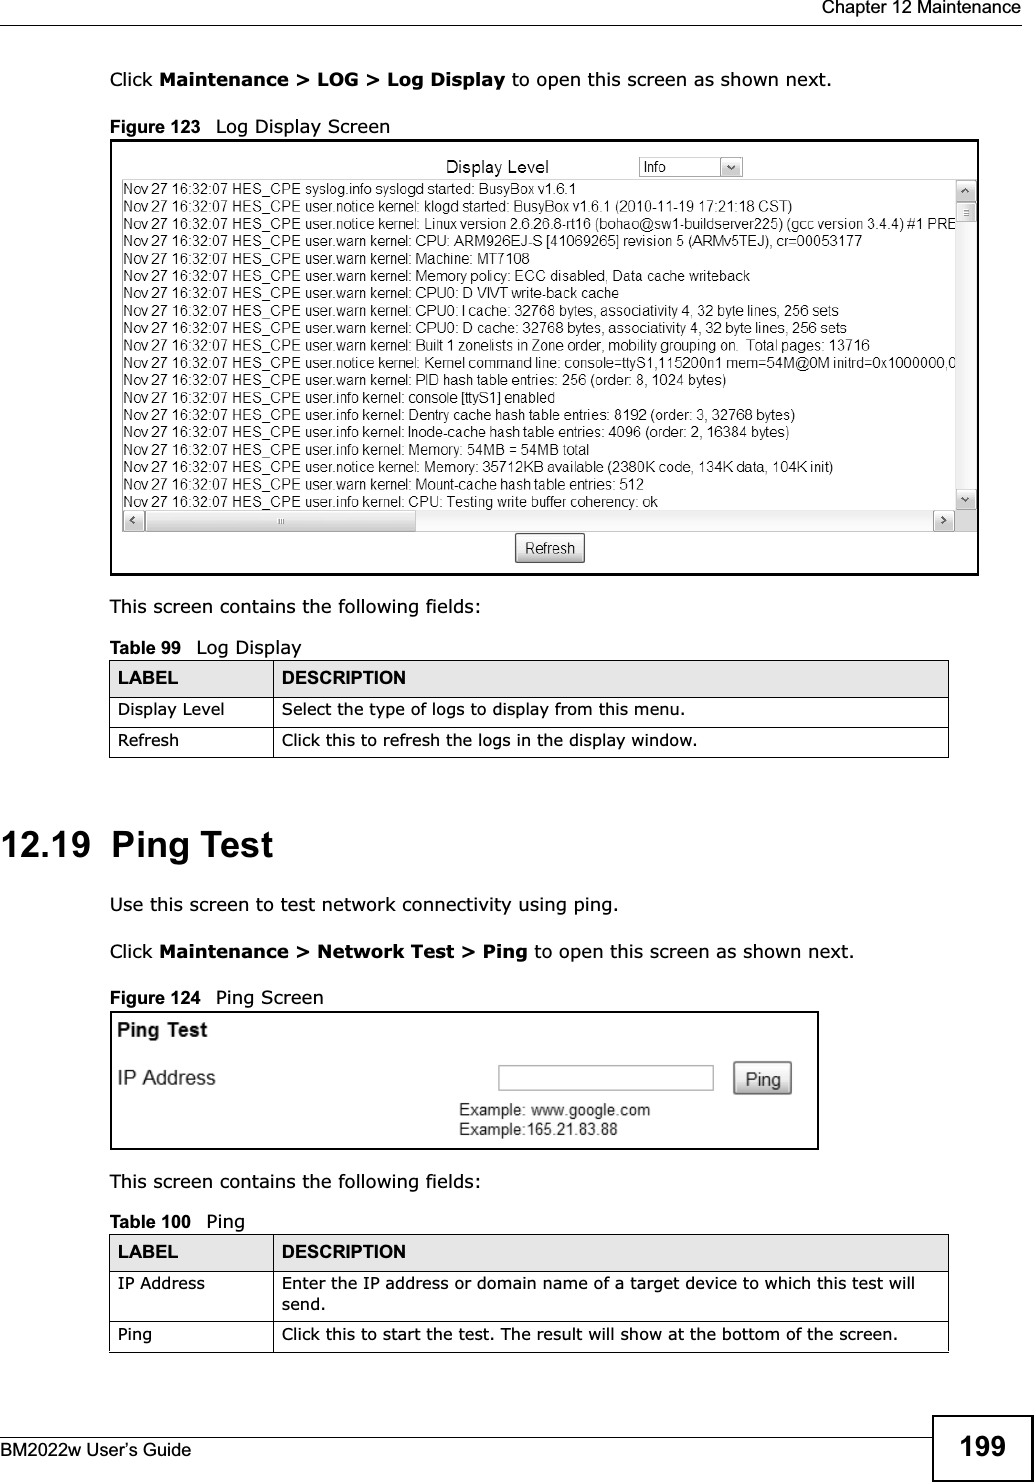  Chapter 12 MaintenanceBM2022w User’s Guide 199Click Maintenance &gt; LOG &gt; Log Display to open this screen as shown next.Figure 123   Log Display ScreenThis screen contains the following fields:12.19  Ping TestUse this screen to test network connectivity using ping.Click Maintenance &gt; Network Test &gt; Ping to open this screen as shown next.Figure 124   Ping ScreenThis screen contains the following fields:Table 99   Log DisplayLABEL DESCRIPTIONDisplay Level Select the type of logs to display from this menu.Refresh Click this to refresh the logs in the display window.Table 100   PingLABEL DESCRIPTIONIP Address Enter the IP address or domain name of a target device to which this test will send.Ping Click this to start the test. The result will show at the bottom of the screen.